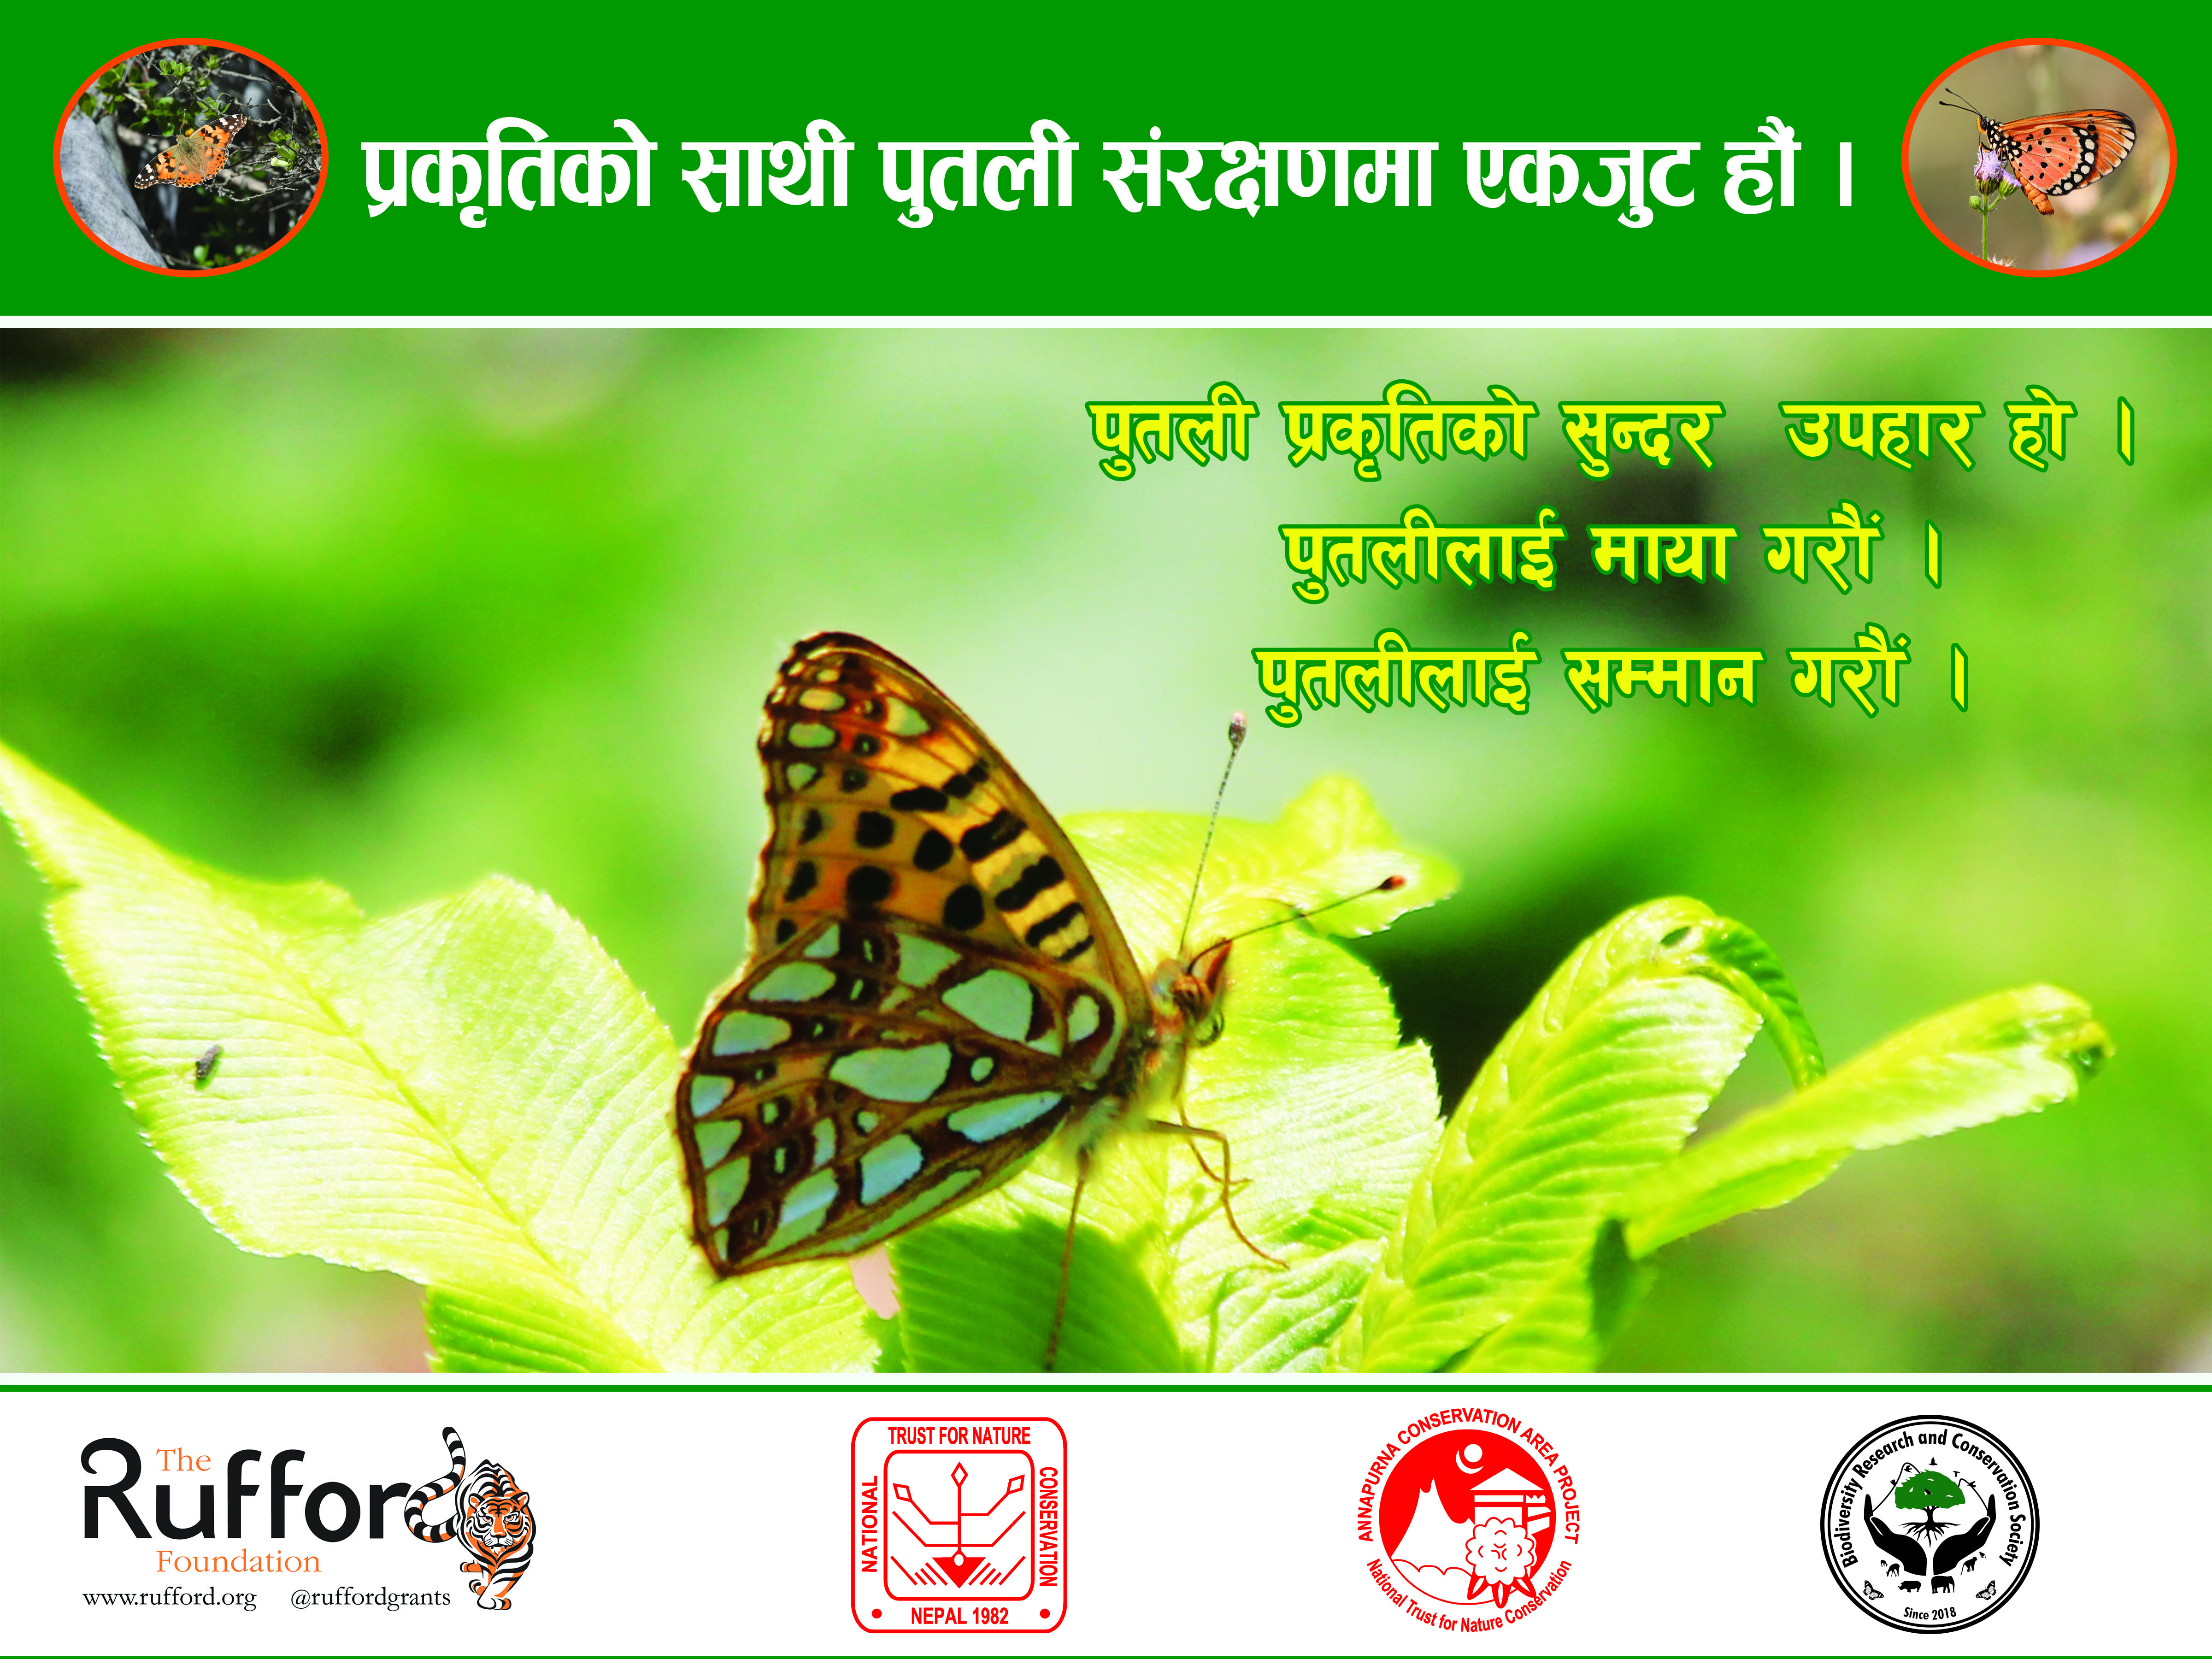 Butterfly conservation workshop,Bimal Raj Shrestha is an entomologist of BRCS, who is working on conservation of Himalayan Butterfly